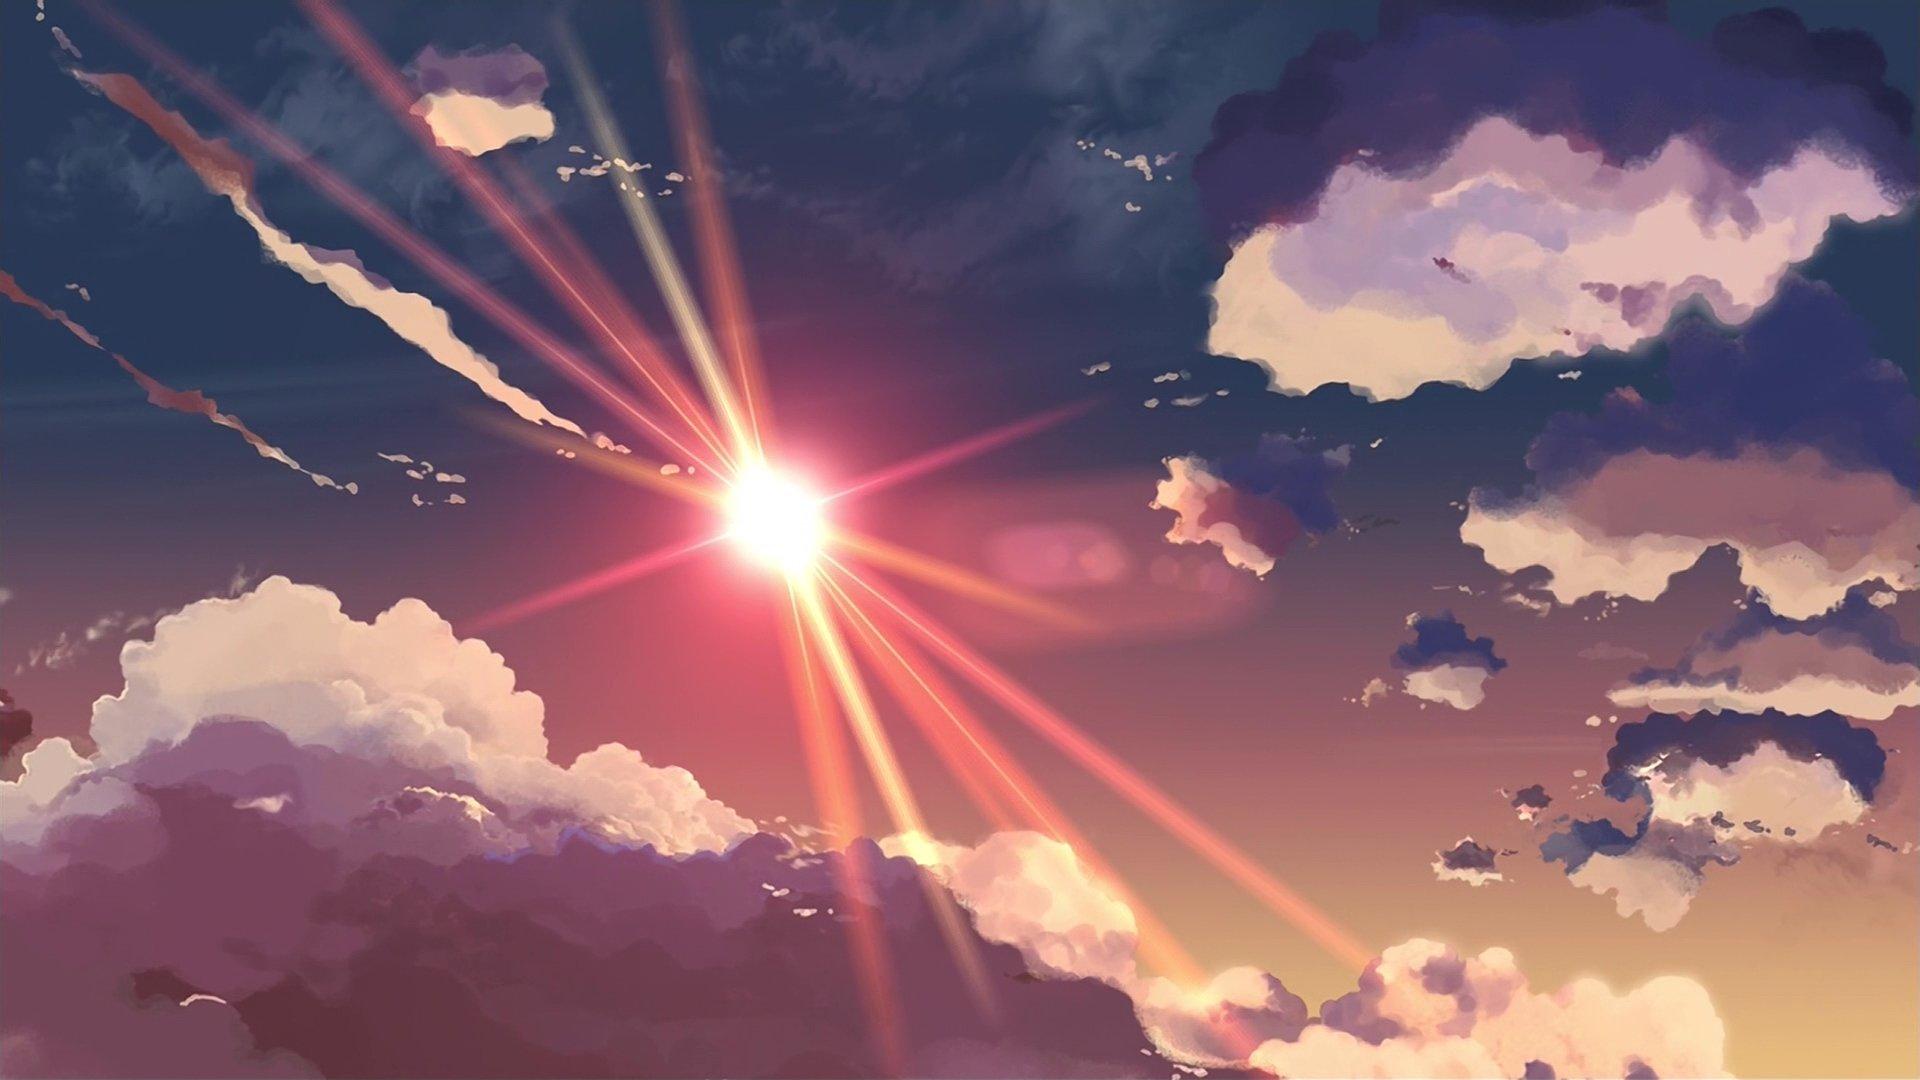 Anime Scenery Wallpaper High Quality Resolution On